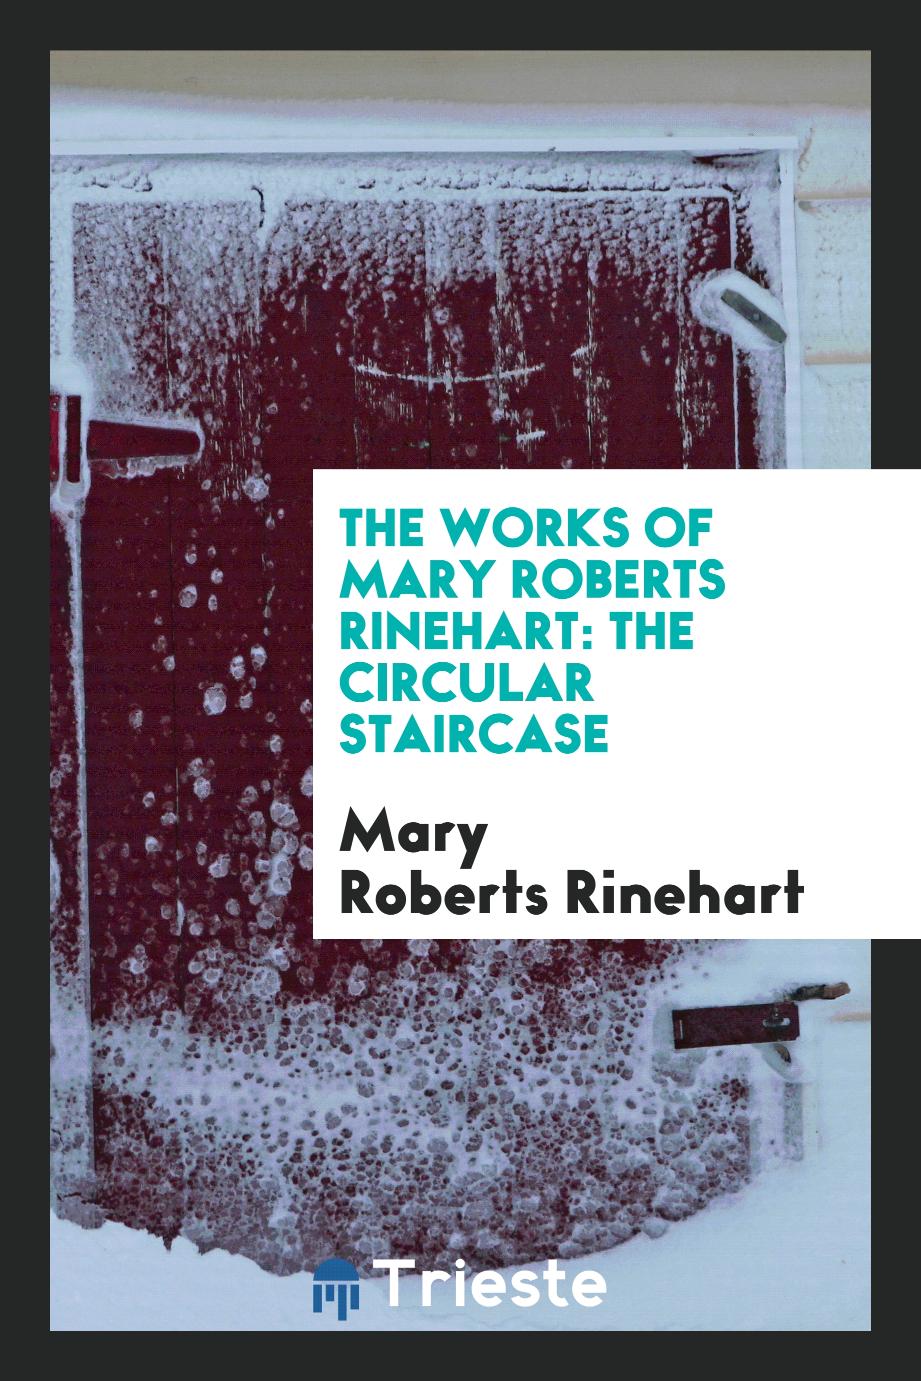 The Works of Mary Roberts Rinehart: The Circular Staircase